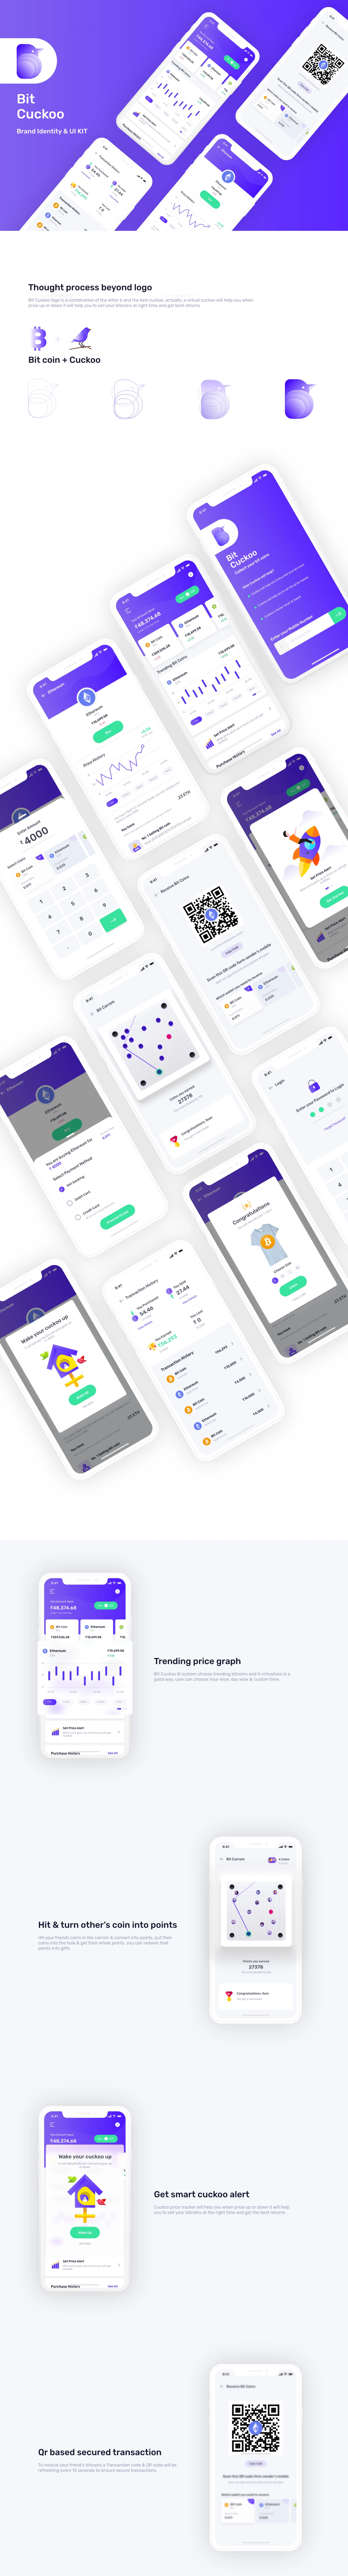 Bit Cuckoo - Bitcoin UI Kit for Adobe XD - Minimal and clean app design by Ramky.